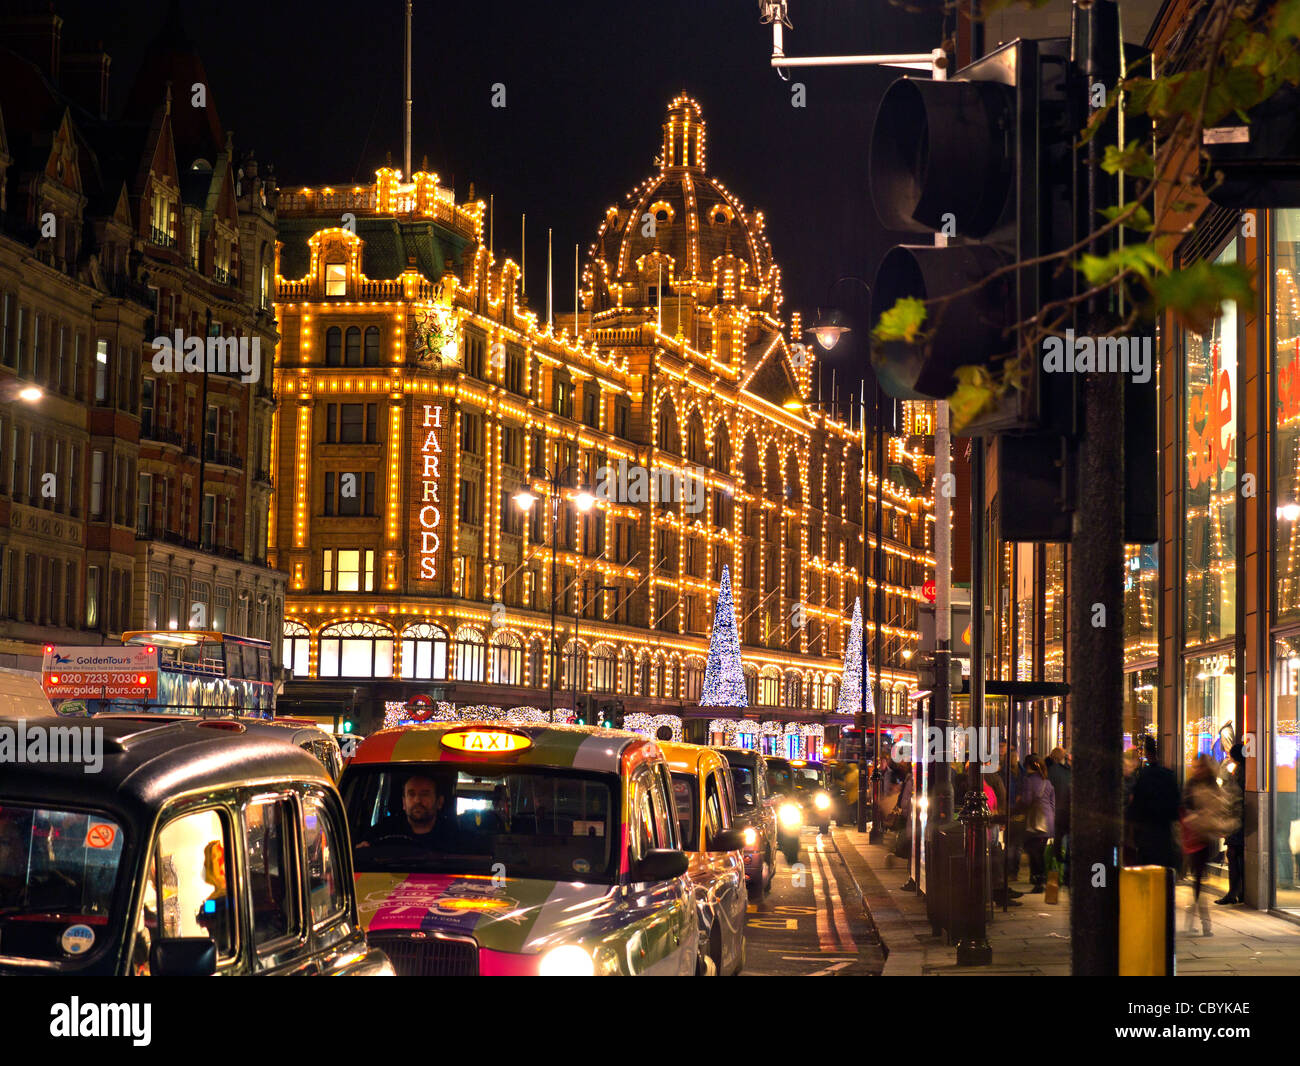 Harrods Department Store with Christmas lights at dusk with taxi cabs waiting in line.Knightsbridge London England UK Stock Photo